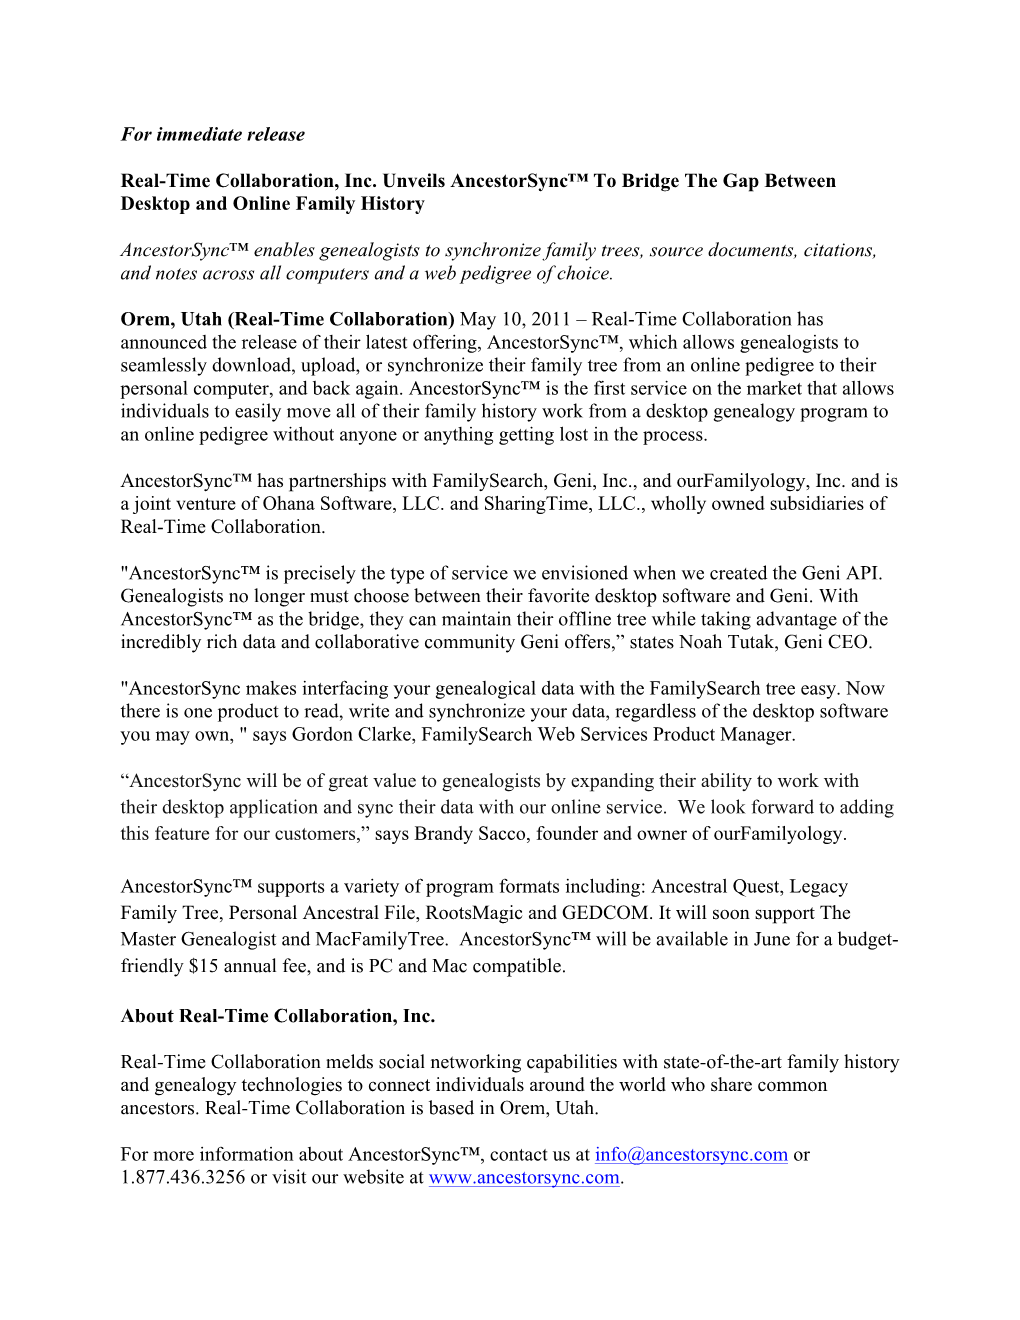 For Immediate Release Real-Time Collaboration, Inc. Unveils